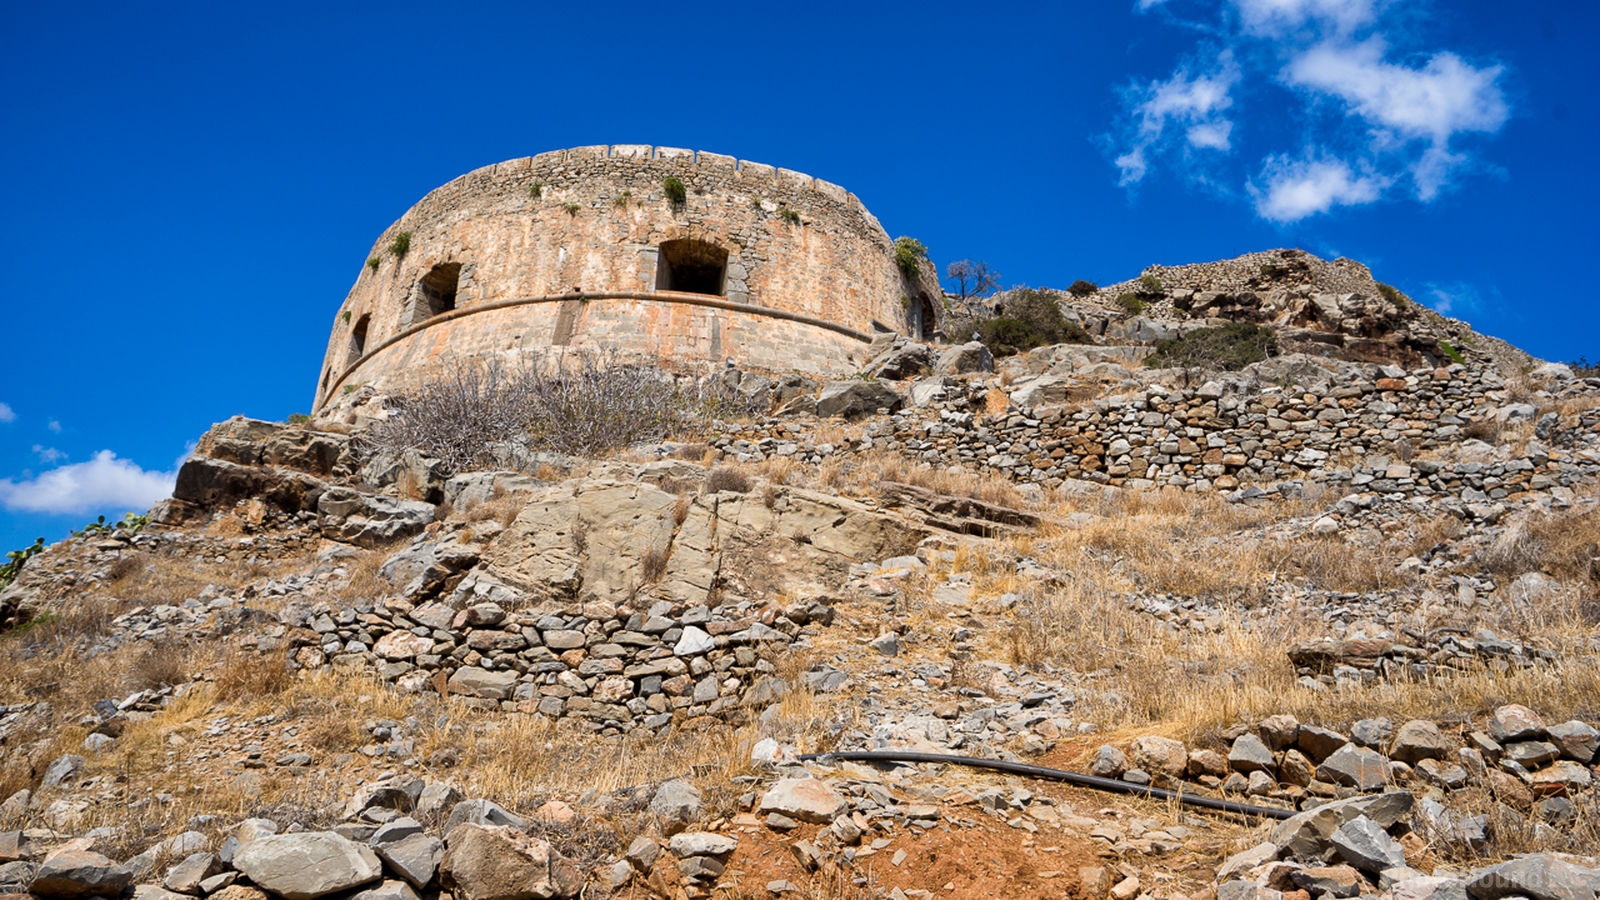 Image of Spinalonga Island and fortress by James Billings.